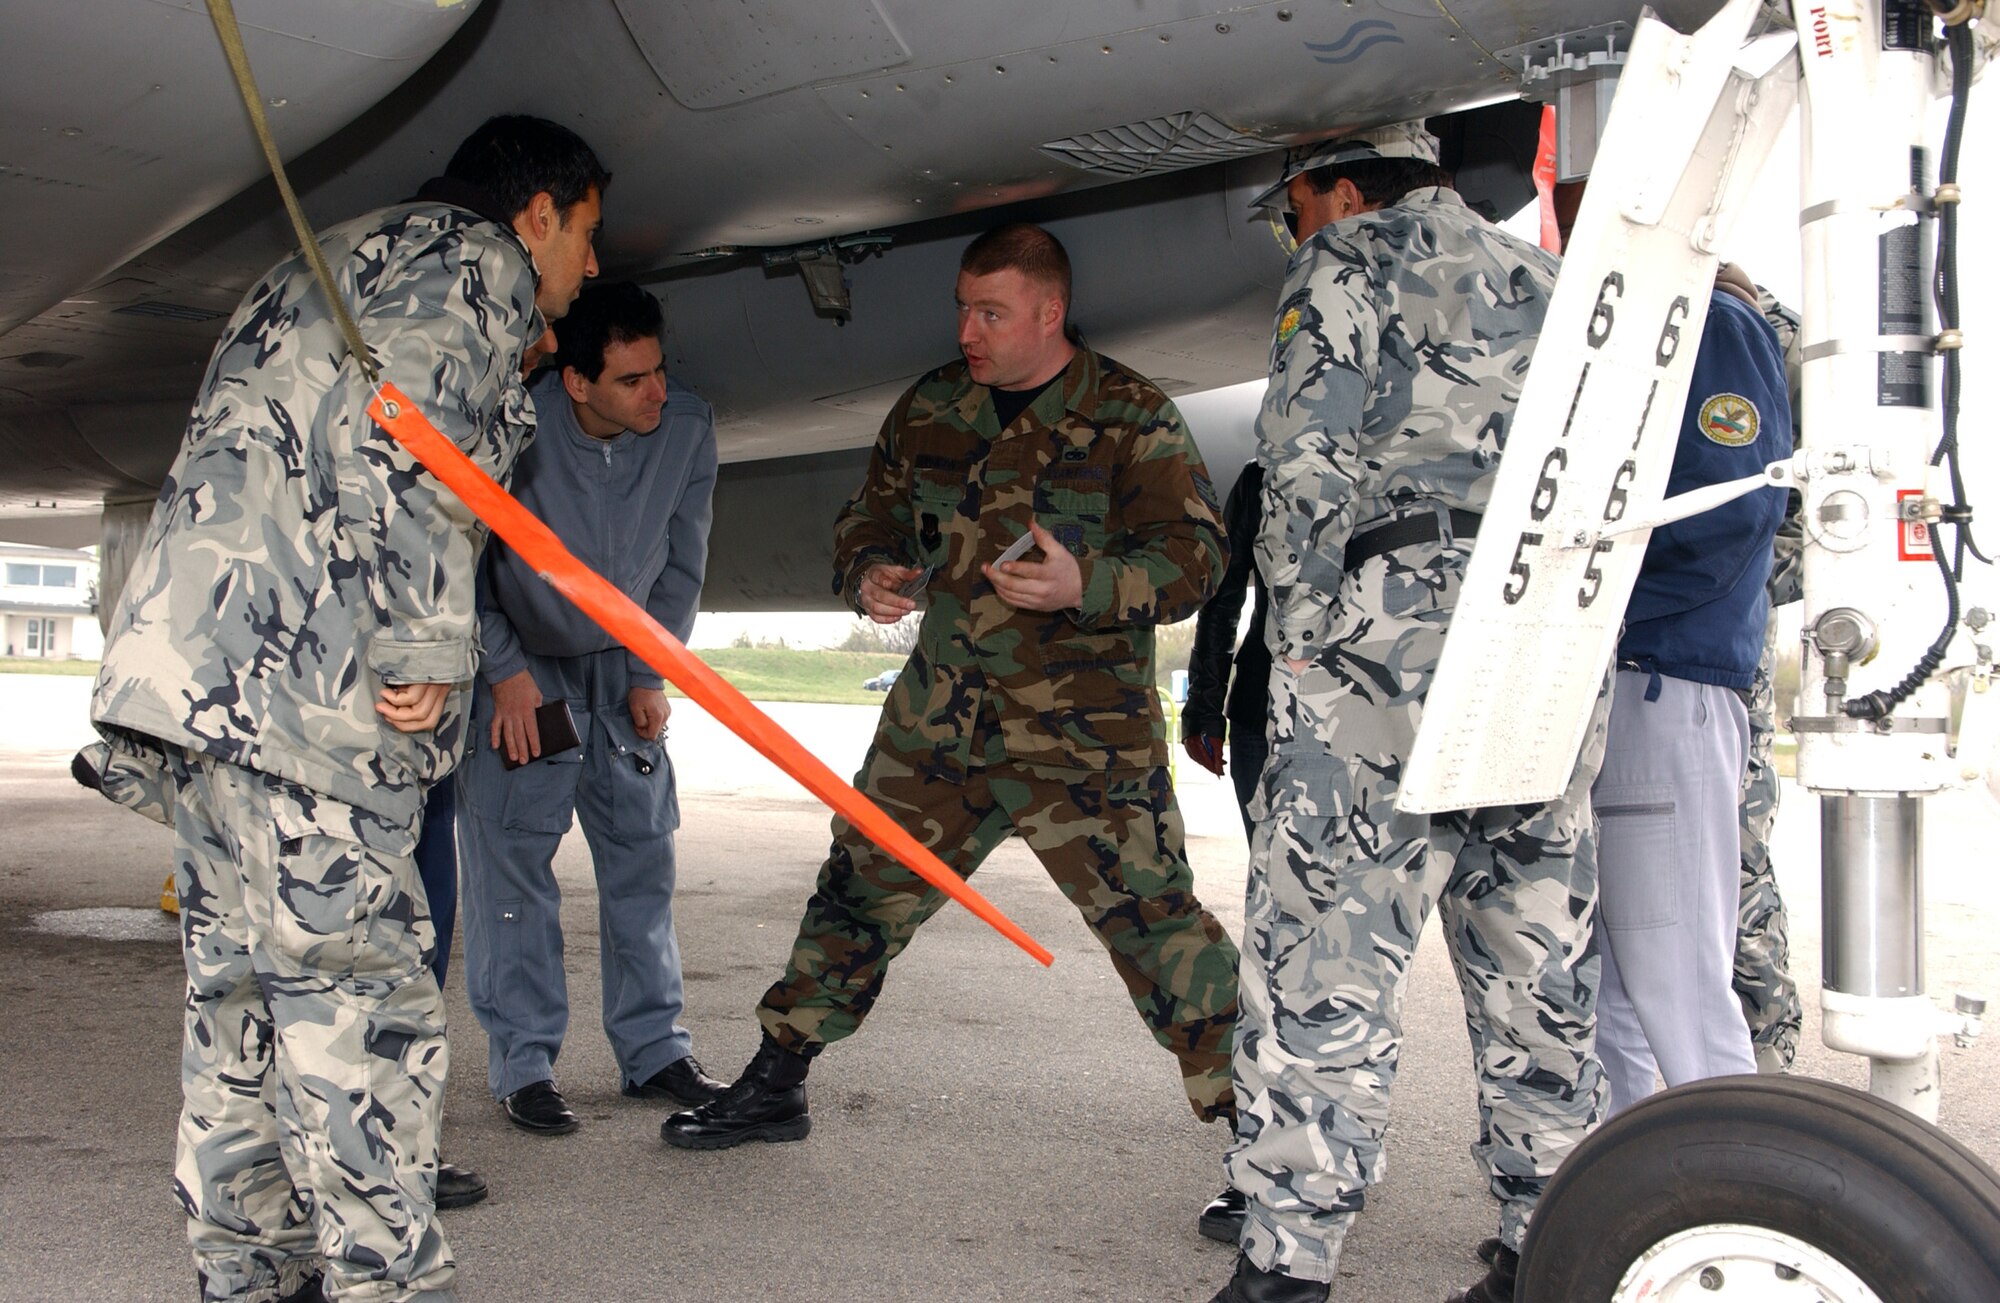 GRAF IGNATIEVO AIR BASE, Bulgaria -- Staff Sgt. Robert Jackson, an F-15 dedicated crew chief, explains the process for purchasing fuel in a NATO country in order to refuel an F-15 to a group of Bulgarian air force crew chiefs.  Sergeant Jackson is participating in a familiarization program here while deployed as part of Operation Noble Endeavor.  (U.S. Air Force photo by Tech. Sgt. Jill LaVoie)